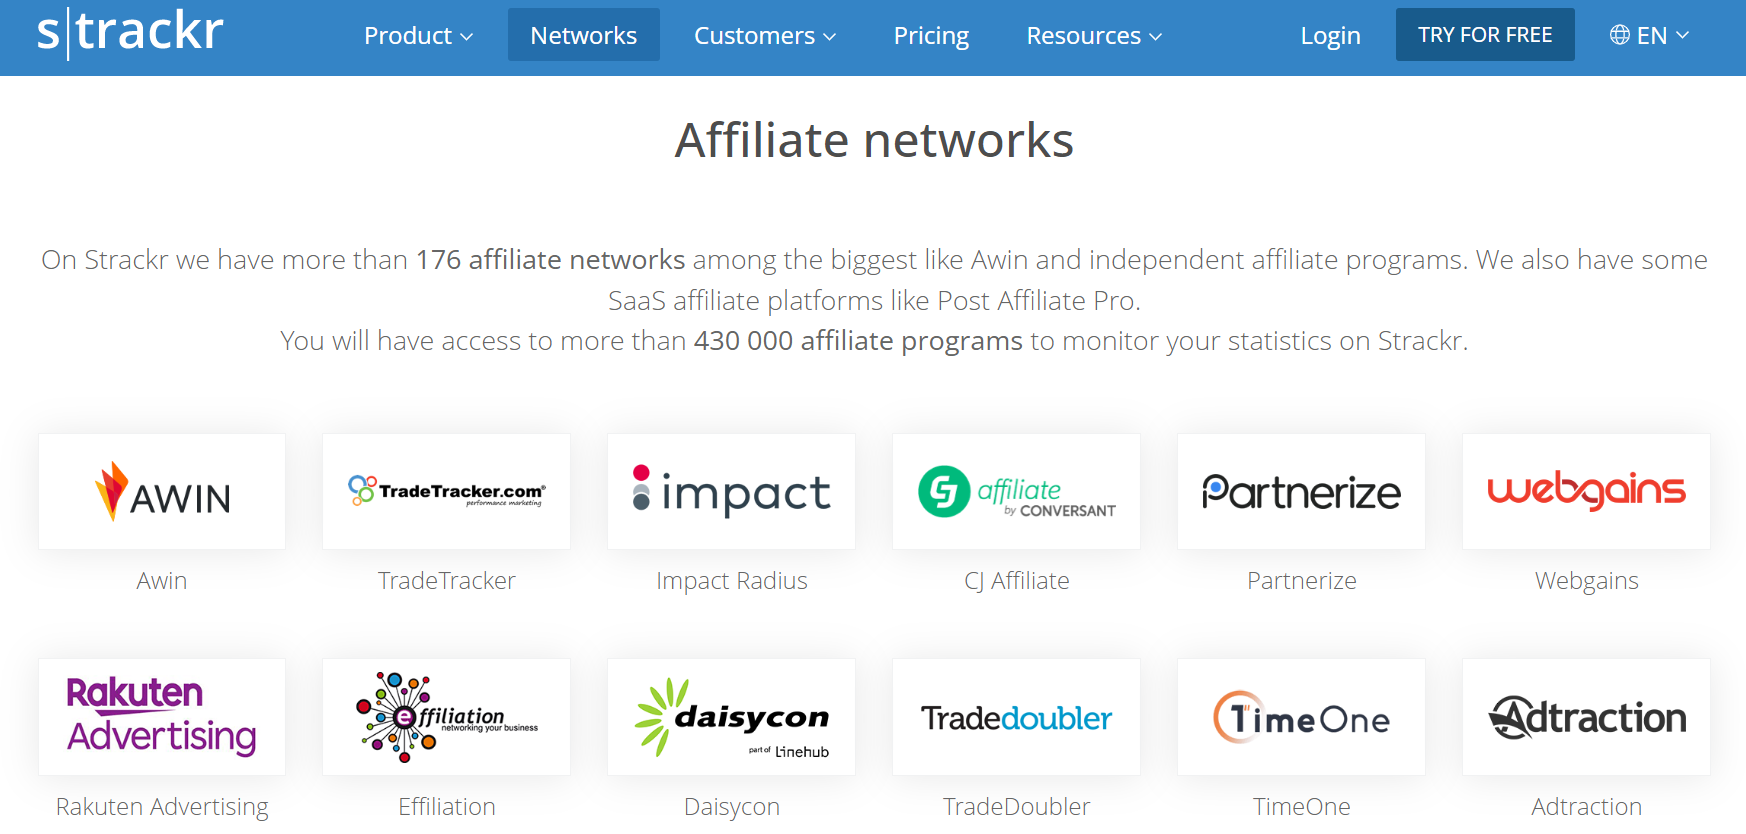 Affiliate networks